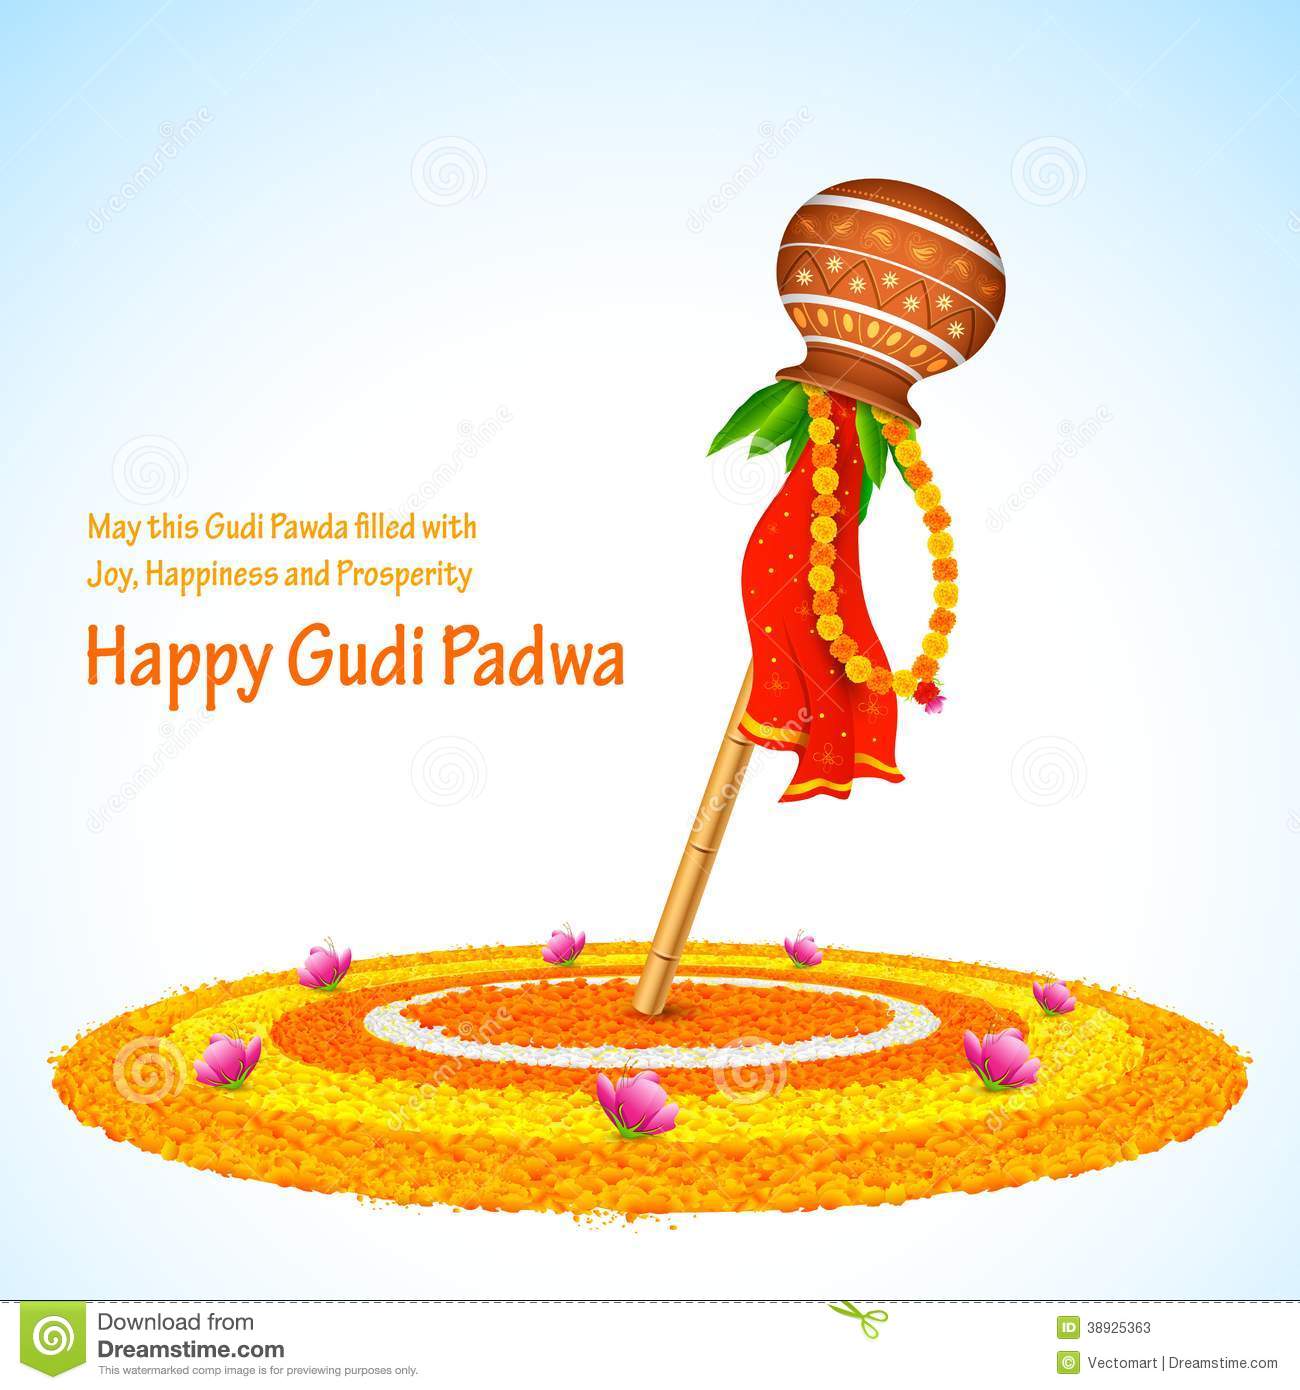 May This Gudi Padwa Filled With Joy, Happiness And Prosperity Happy Gudi Padwa